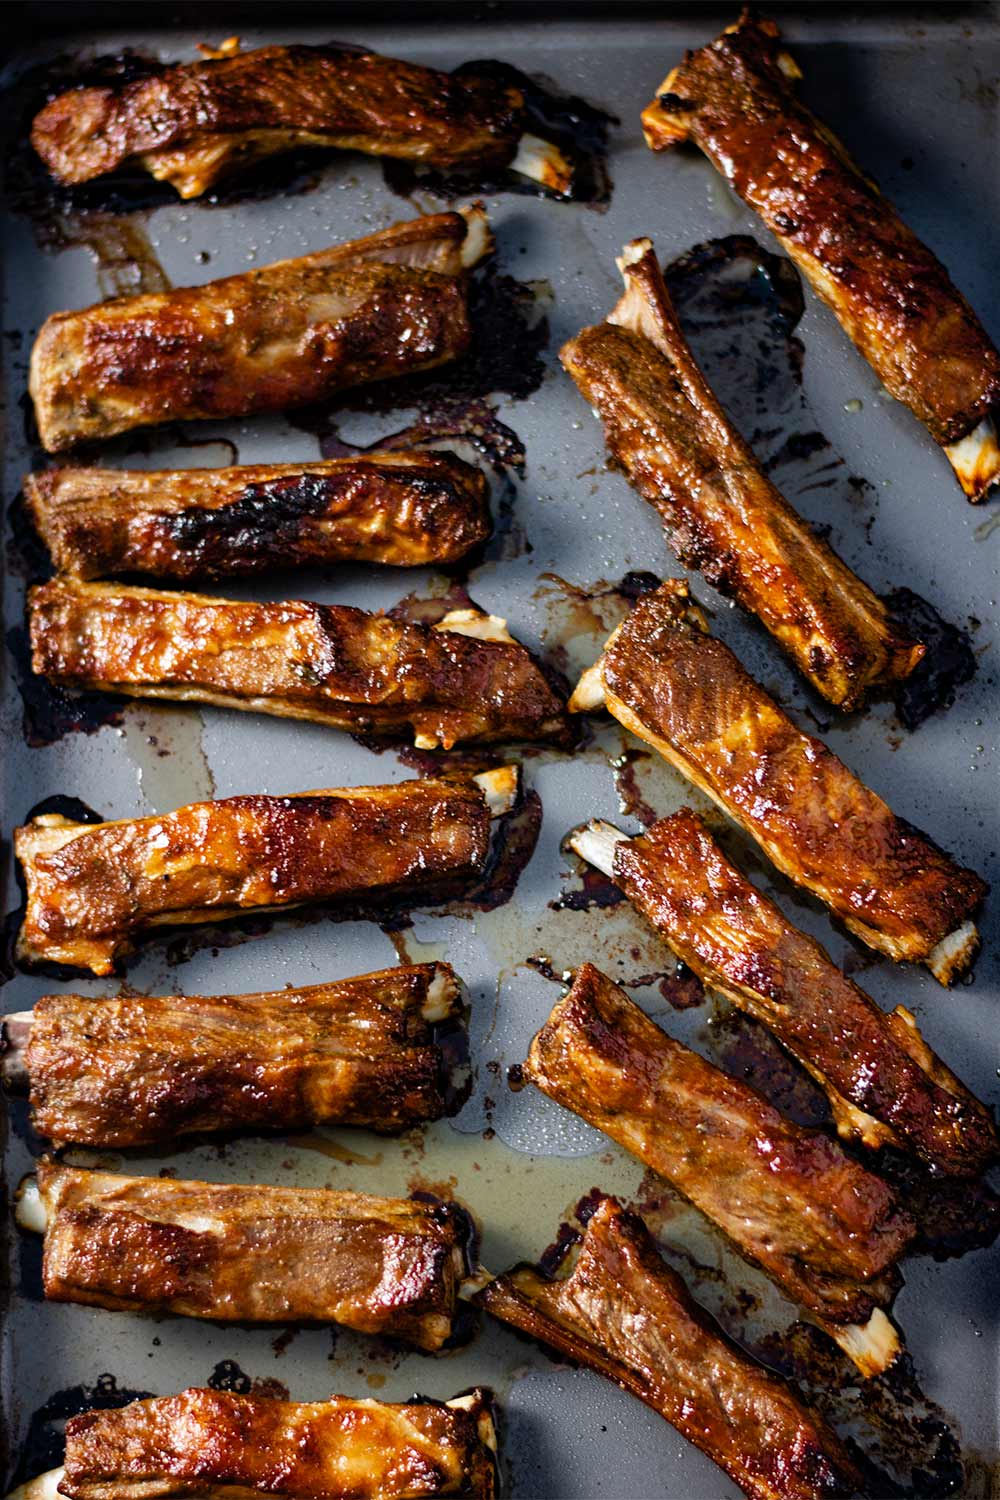 The Best Keto Sticky Lamb Ribs Rcipe with Low Carb BBQ Sauce